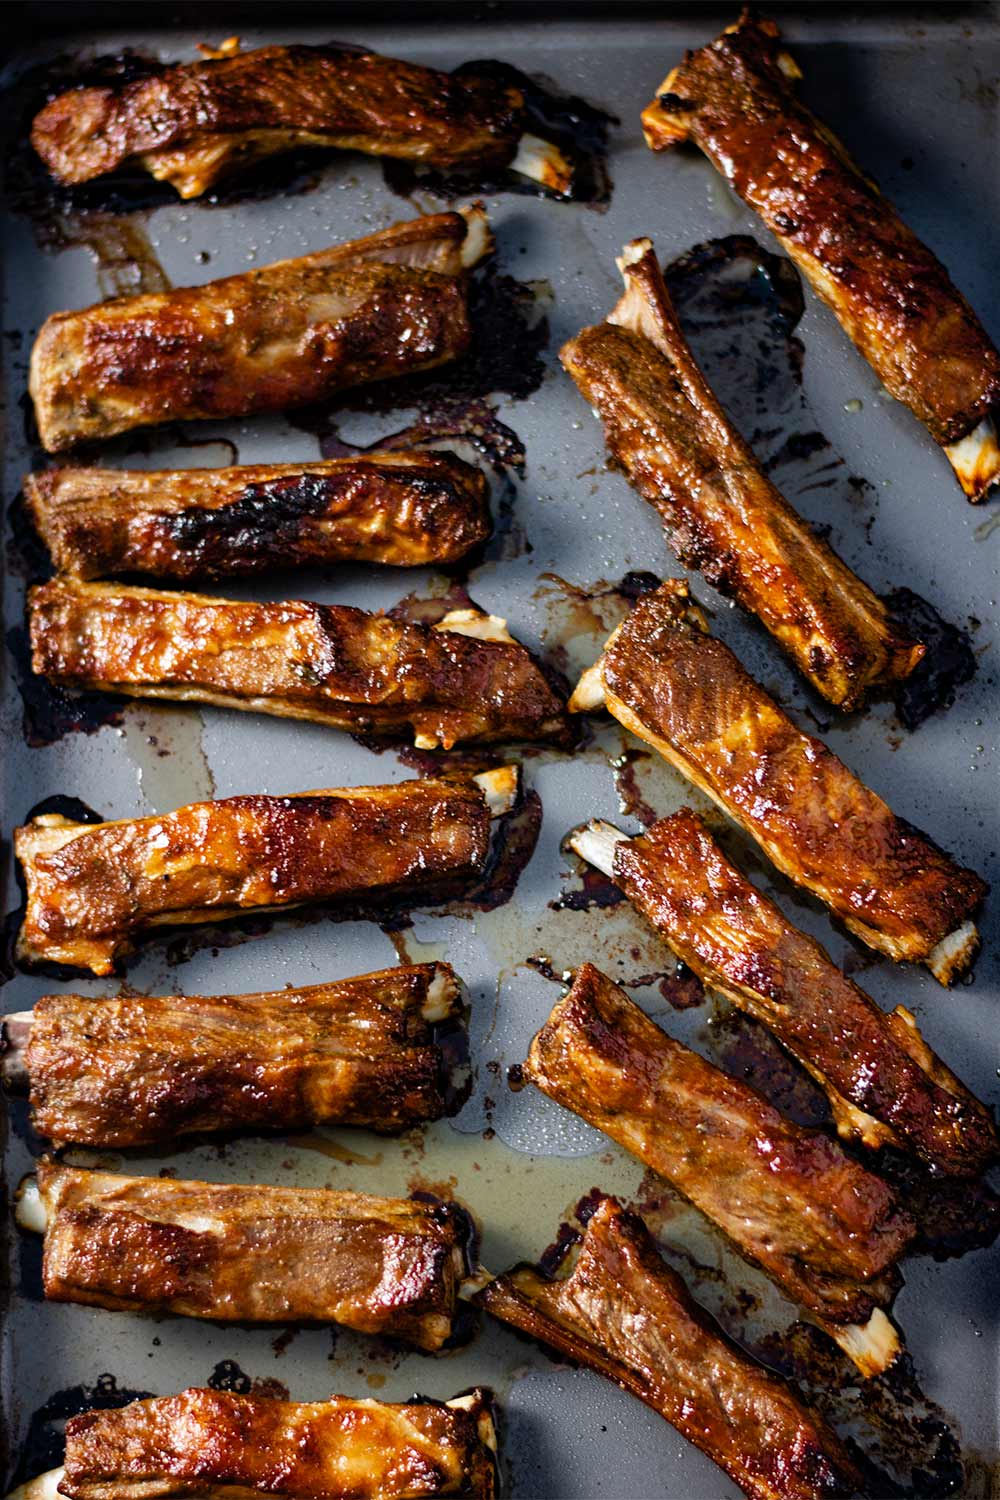 The Best Keto Sticky Lamb Ribs Rcipe with Low Carb BBQ Sauce